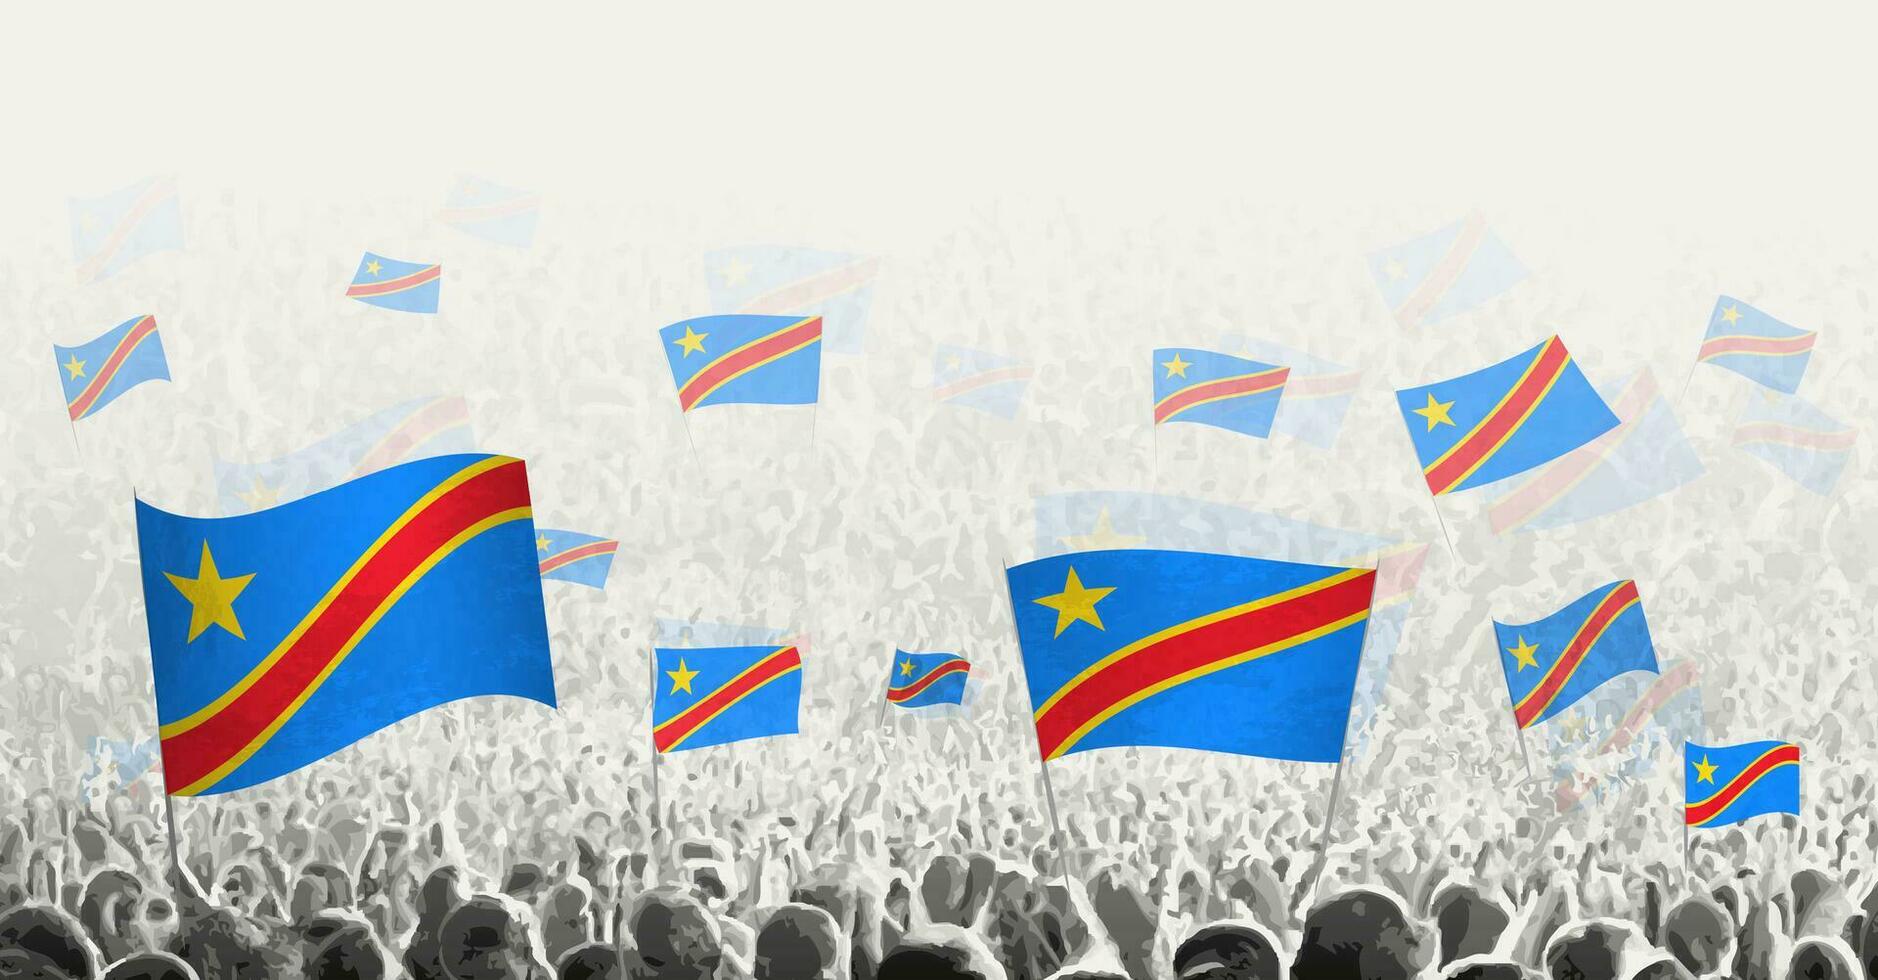 Abstract crowd with flag of DR Congo. Peoples protest, revolution, strike and demonstration with flag of DR Congo. vector